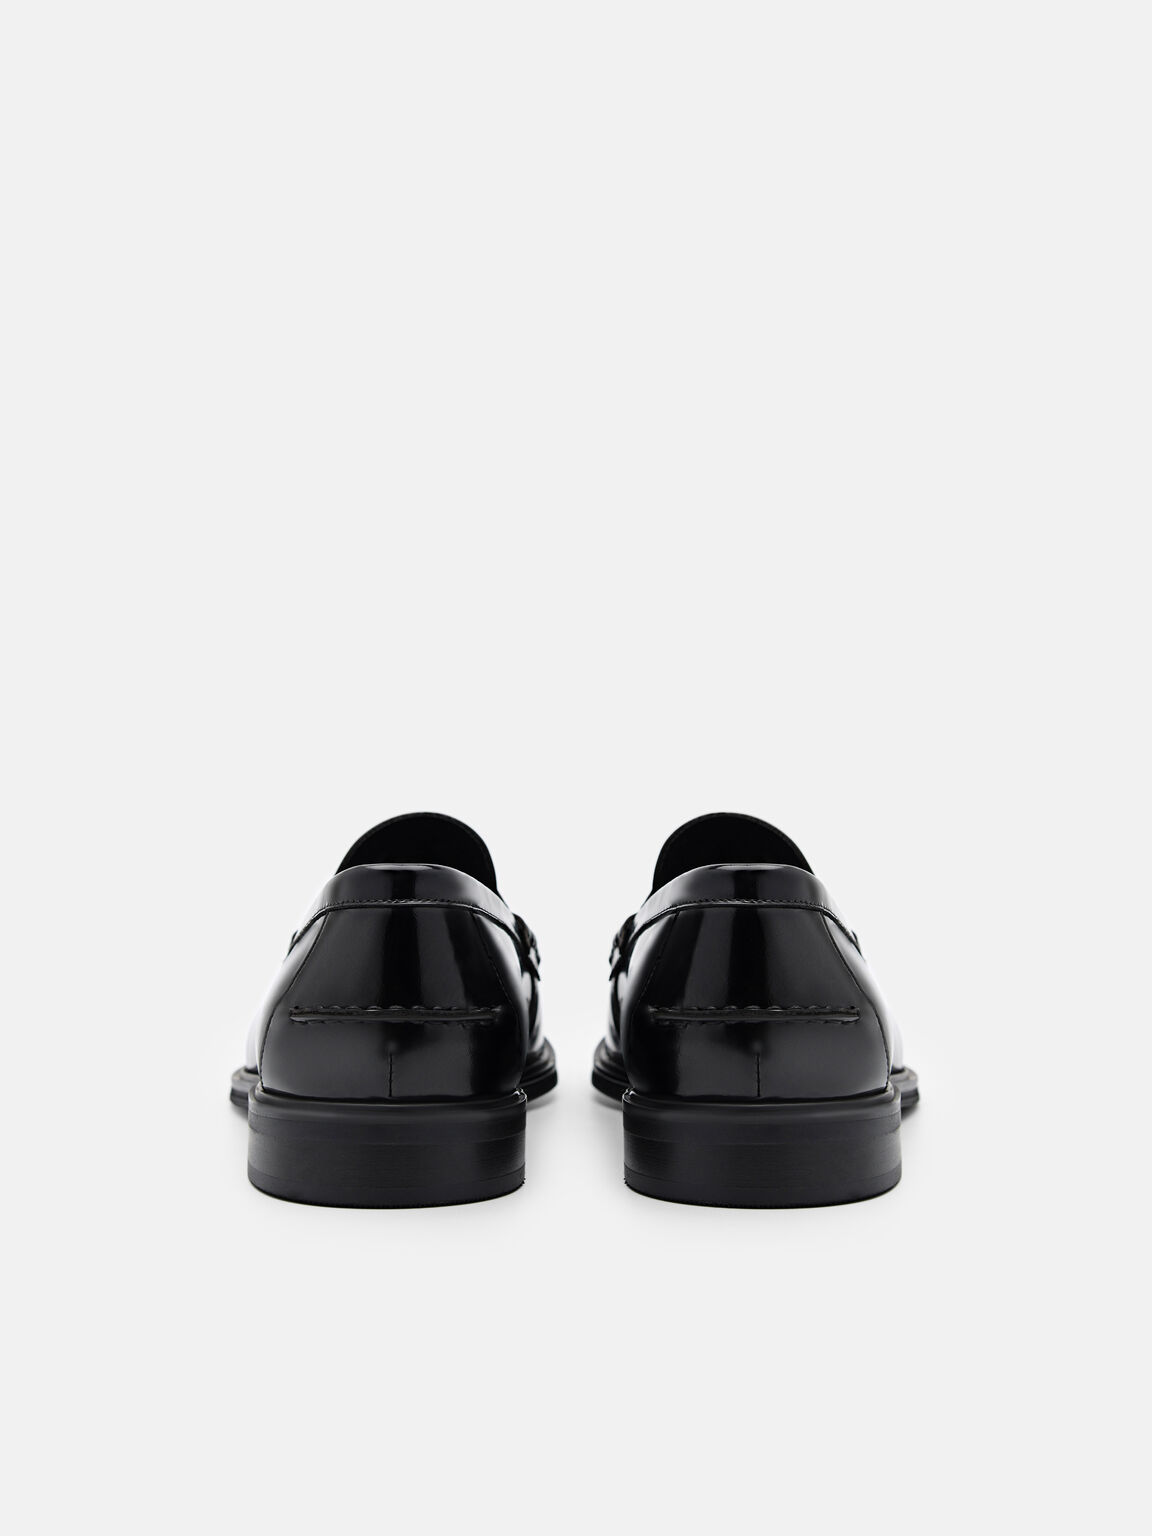 Black Leather Penny Loafers - PEDRO SG